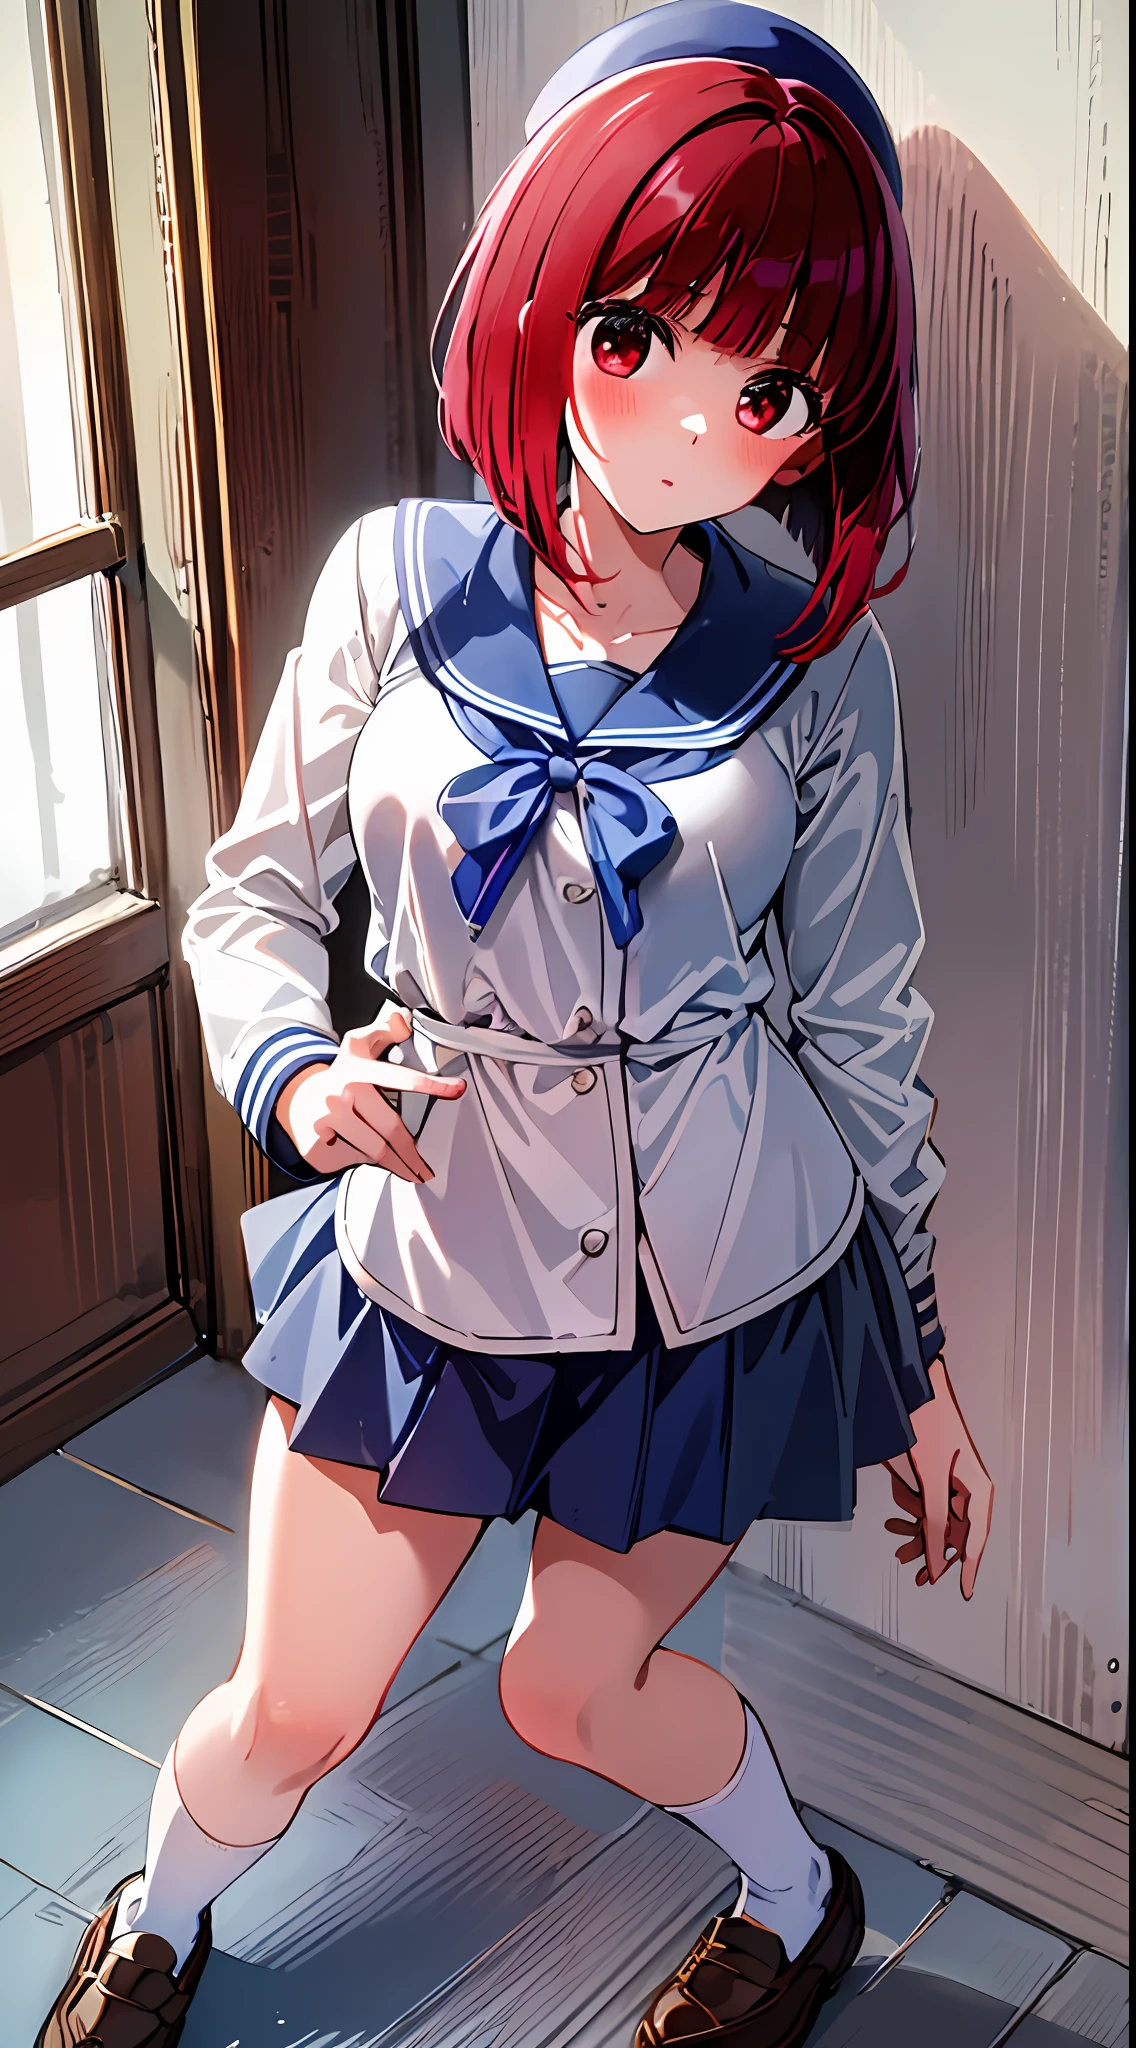 Winter, main girl is beautiful and cute, traditional uniform, navy blue sailor suit, "neat and bright uniform coordination", full body, full body illustration, best illustration, realistic and elaborate uniform, high , elementary school student, ((highest quality)), ((masterpiece)), (detail: 1.4), anatomical, award-winning concept art, beautiful, fine details, portrait, looking viewer, (full body view) ), 1 girl, full body, solo, 6 years old, elementary school student,  actor, red hair, red hair, short hair, red eyes, big eyes, cute underwear, panties, long skirt, silk material panties, skirt lift, blush, classroom, belly button out, clothes lift, easy background, lifting clothes, white shirt, uniform, sailor suit, Japan cute uniform, look away, loli, elementary school, The main girl is beautiful and cute, , baby face, cute, young, young appearance, fantastic visual depiction, professional effect, beautiful girl,  girl, unevenness, absurdity, unevenness, the oldest girls' school Japan based on Christianity along with the girls' school for uniform, "very cute with traditional uniform", "very cute sailor suit for both summer and winter clothes", loafers, red hair, Red eyes, traditional uniform, neat and clean coordination, "In line with our school's educational policy of "nurturing independent women", the beauty of intelligent and dignified women is expressed in uniforms.